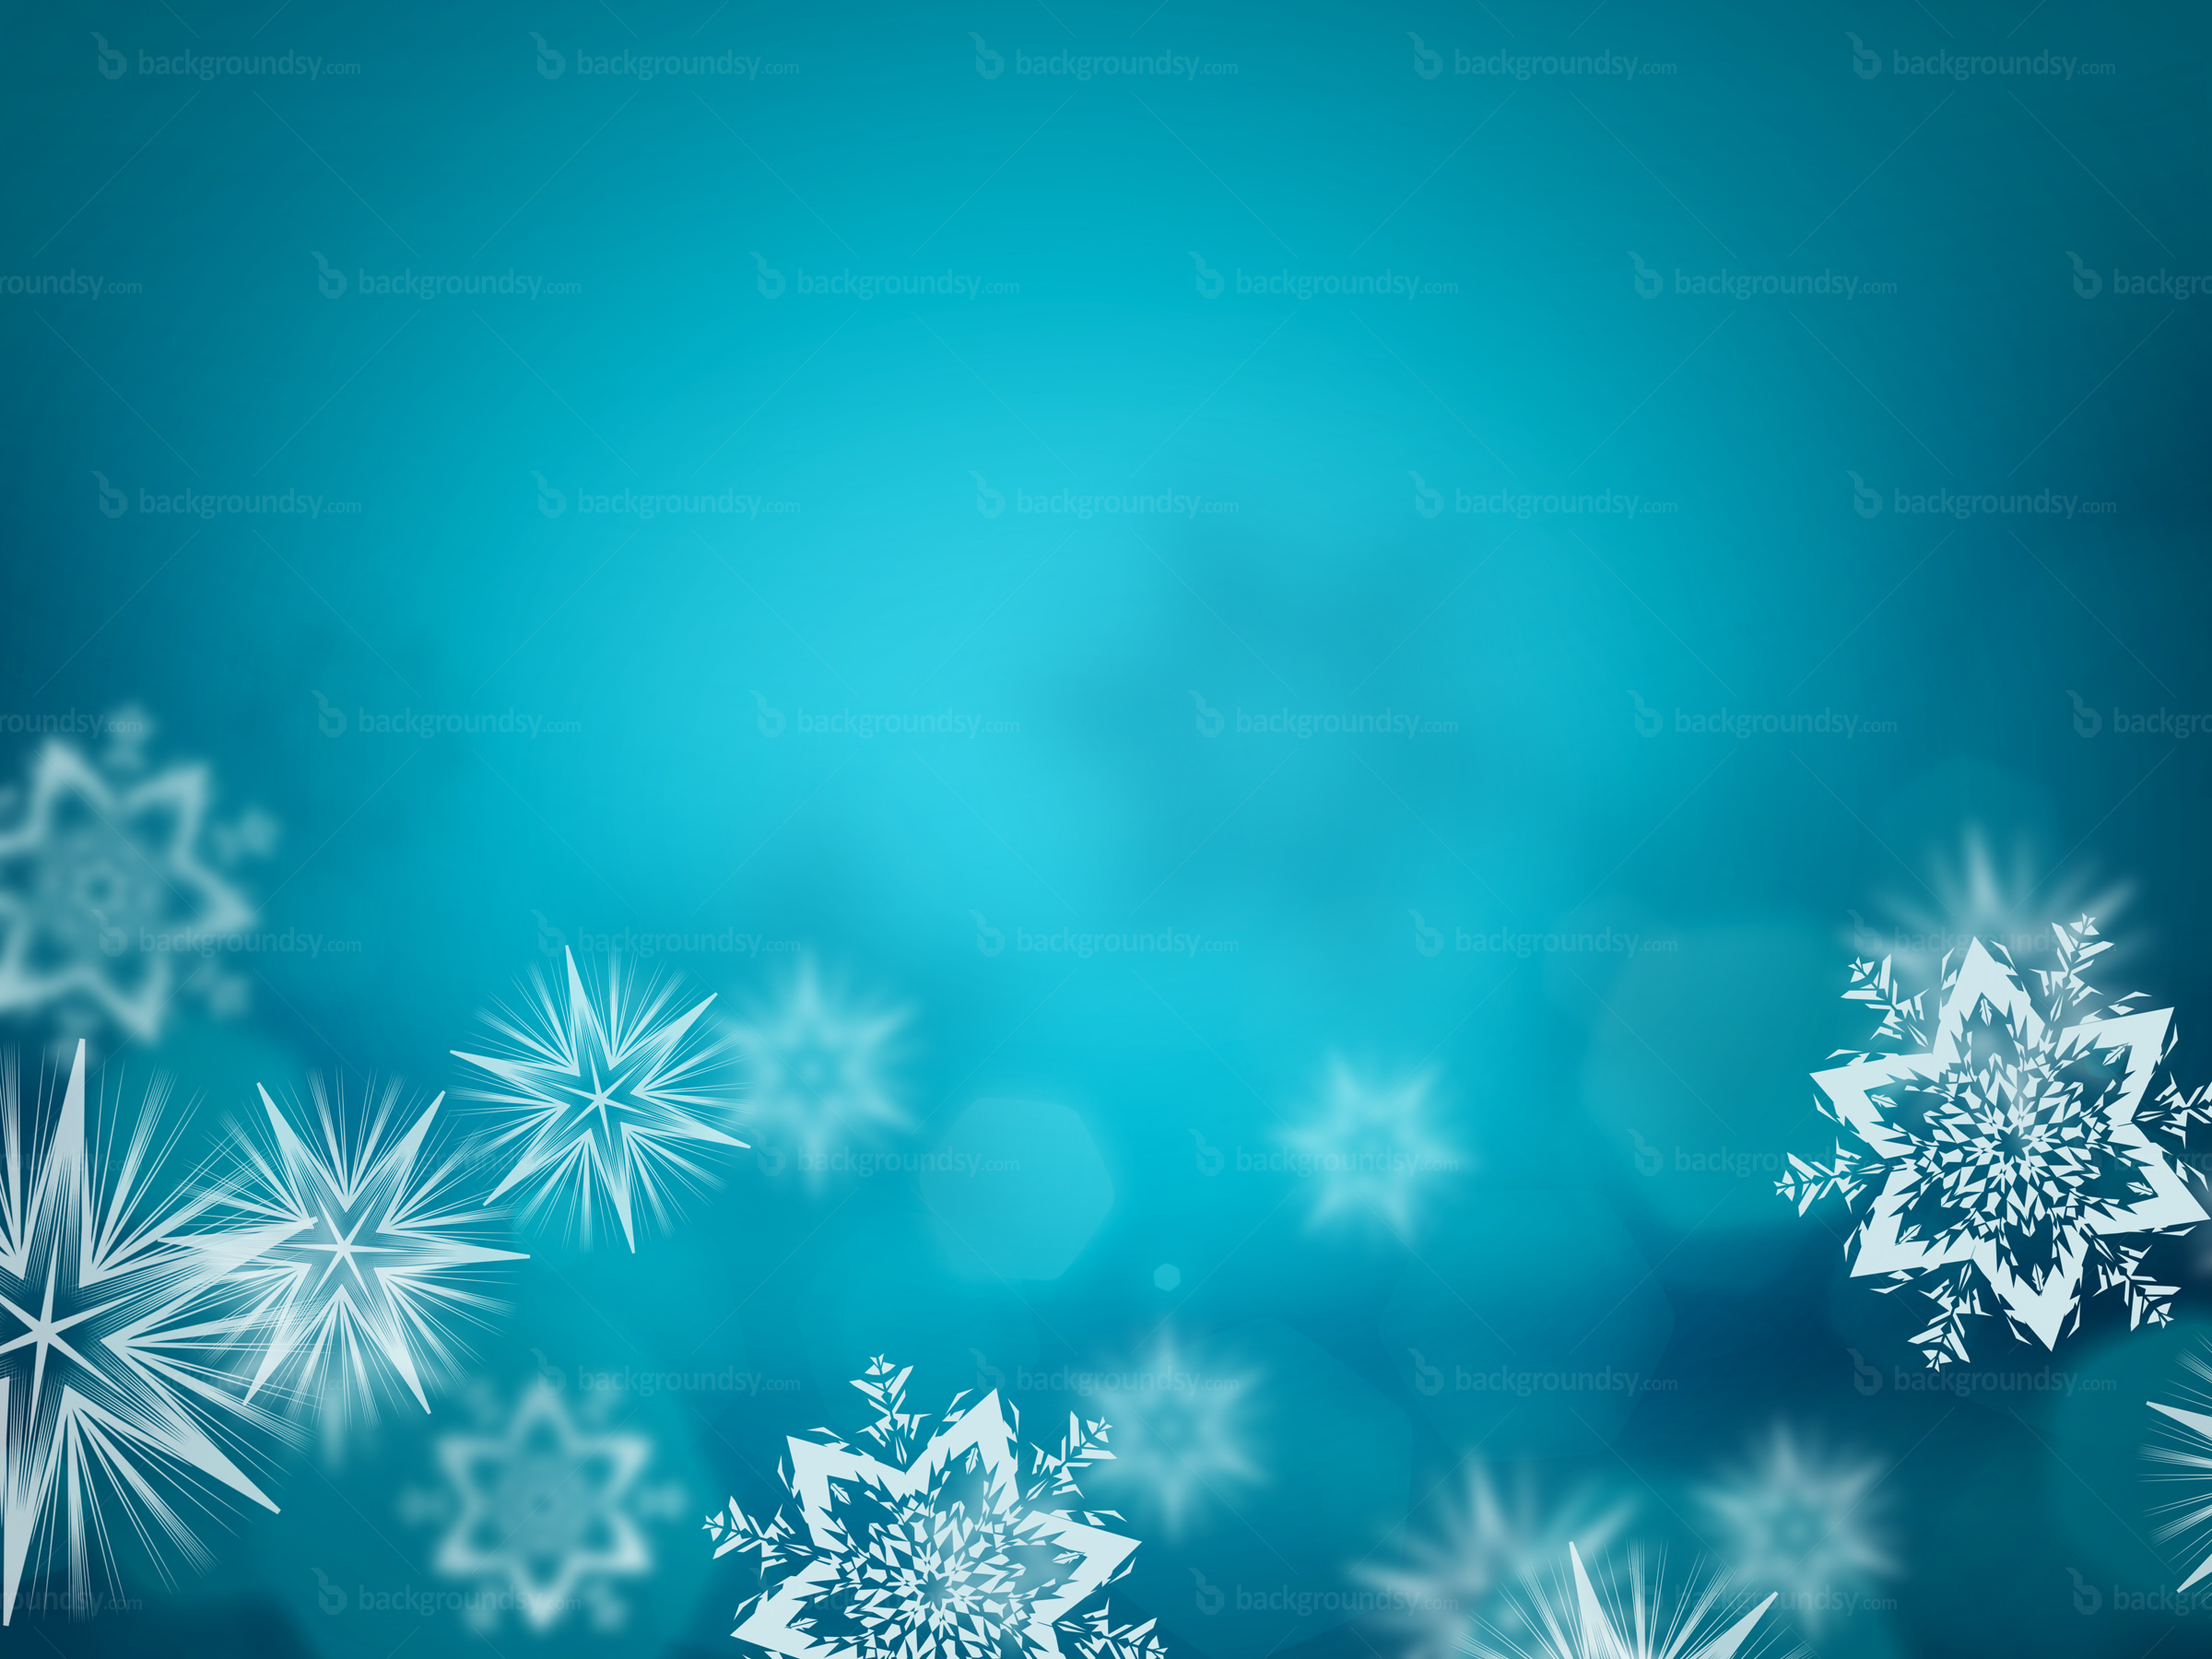 Winter Background Image Size Wallpaper